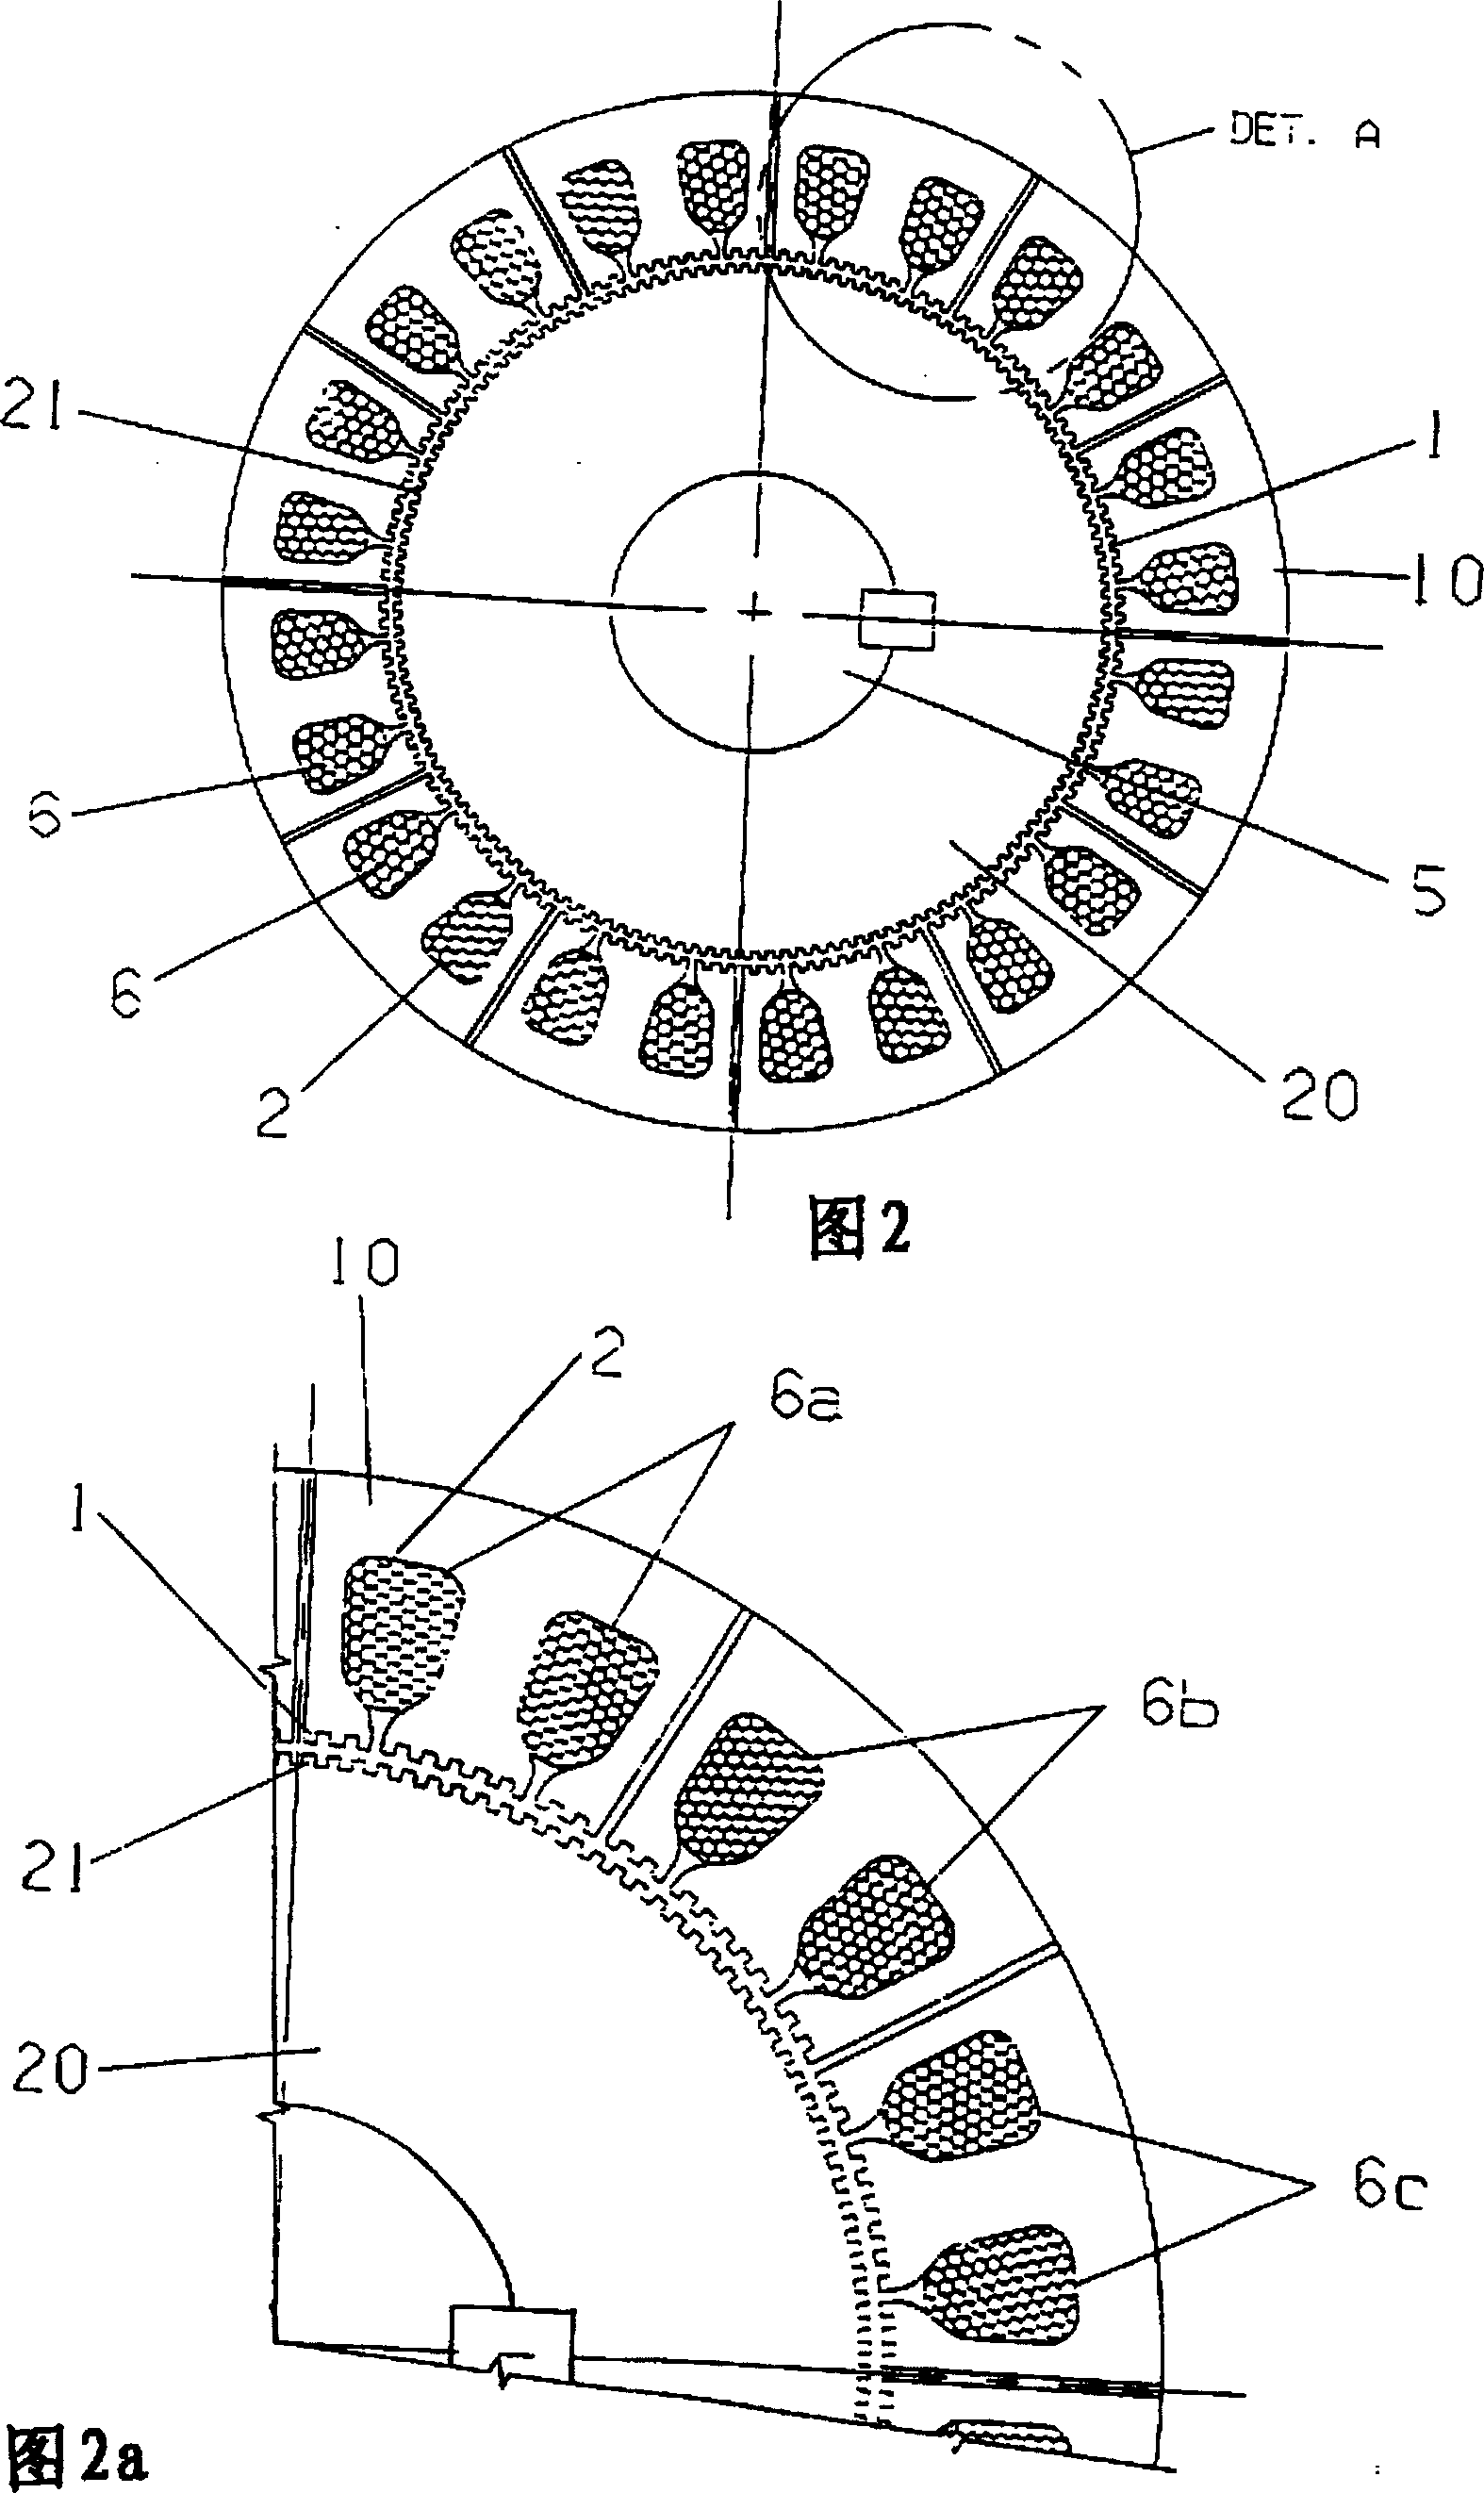 Quasi-synchronous reluctance motor